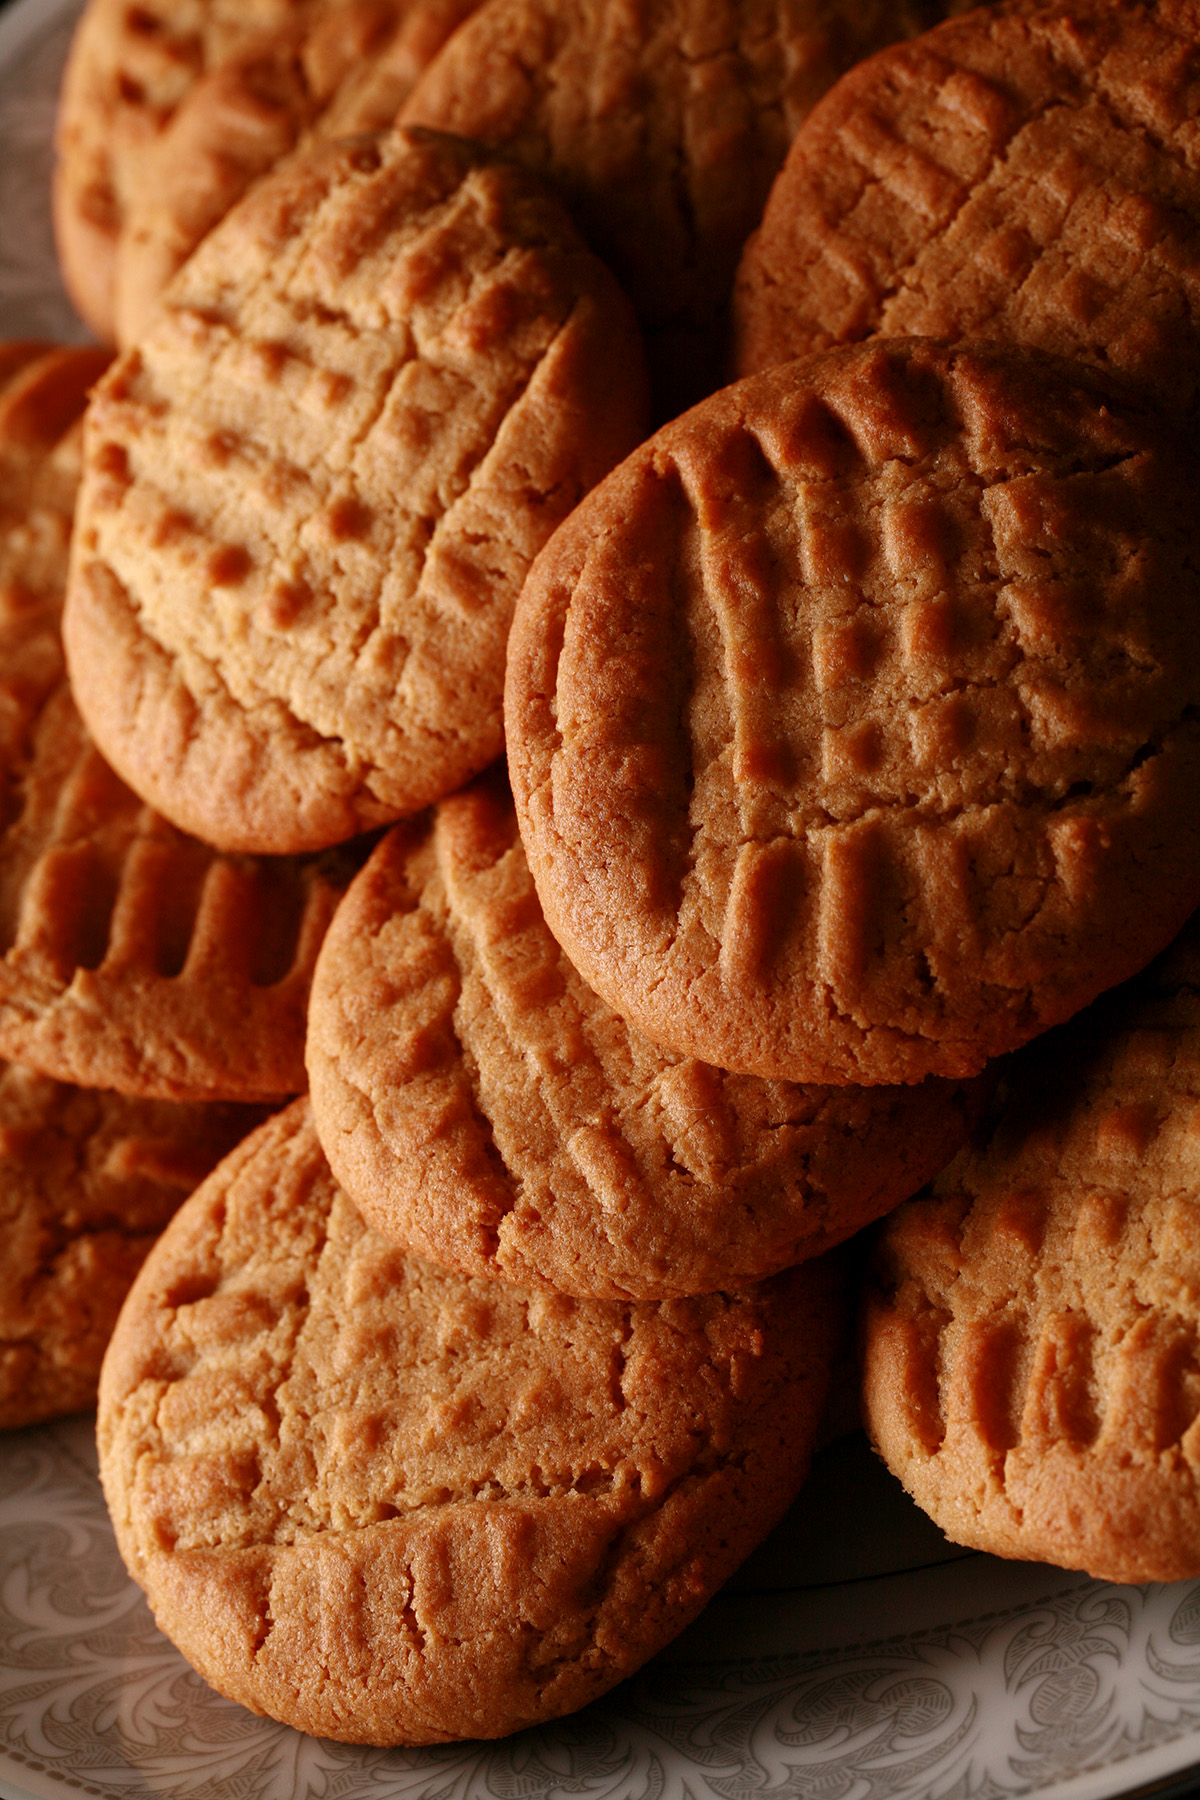 A plate of soft and chewy gluten-free peanut butter cookies.